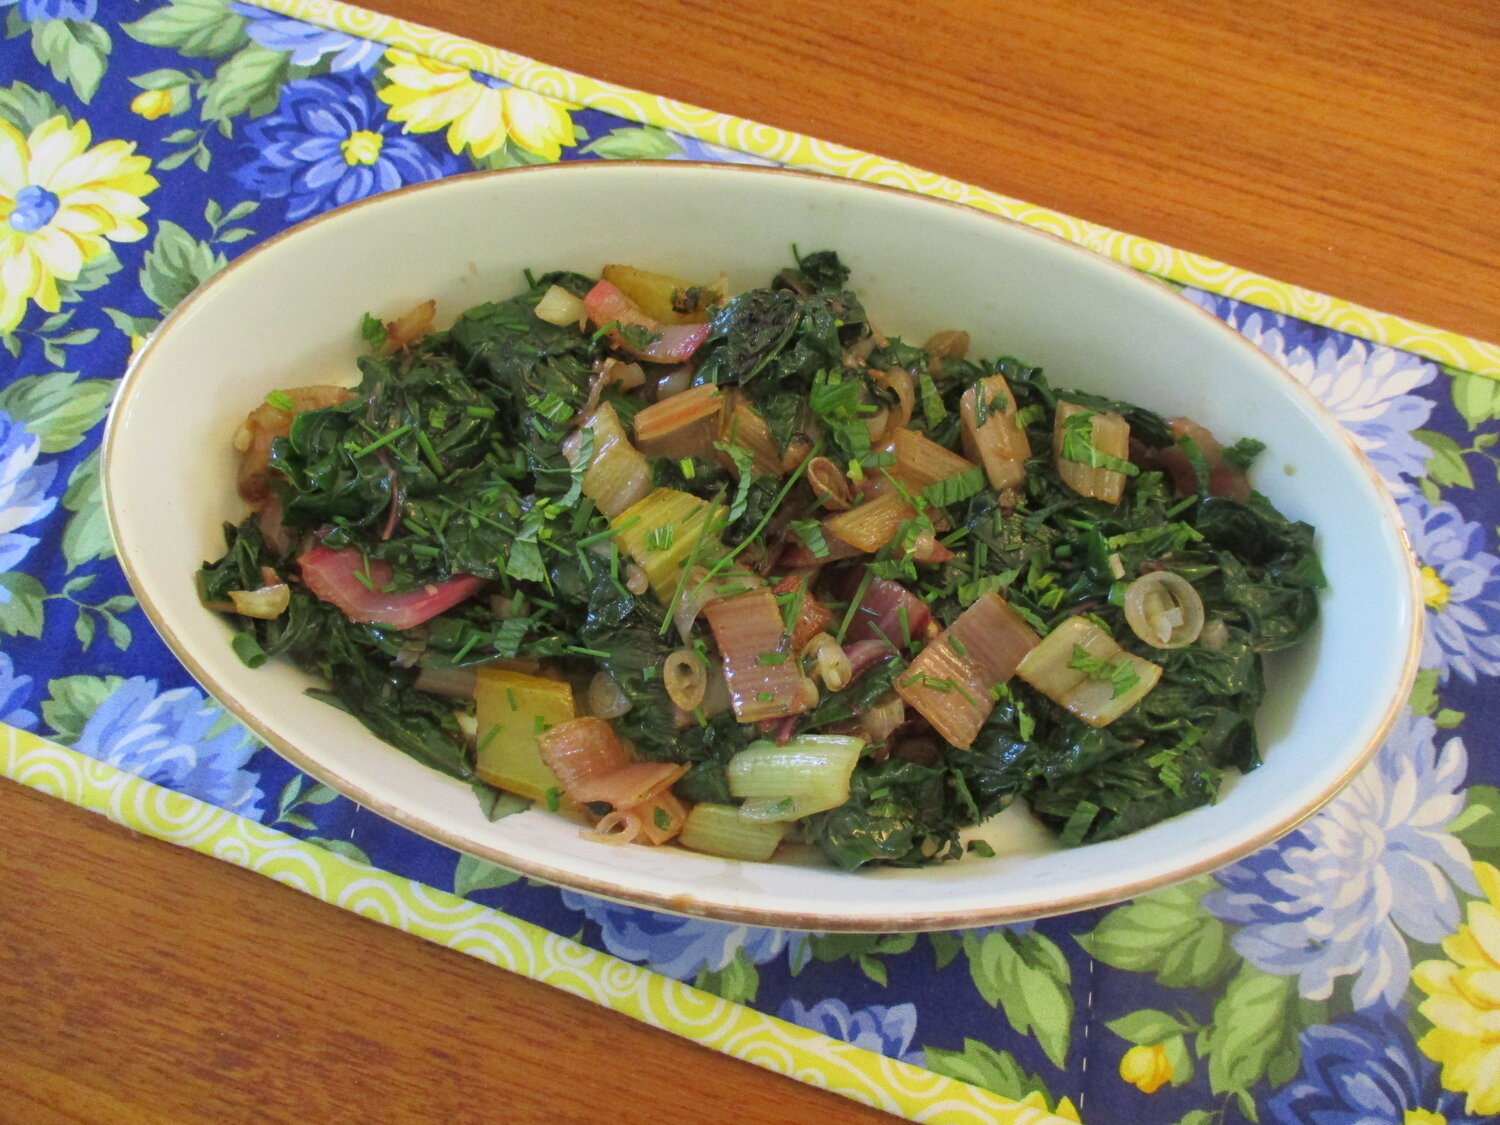 Sauté of Swiss chard and ramps with herbs